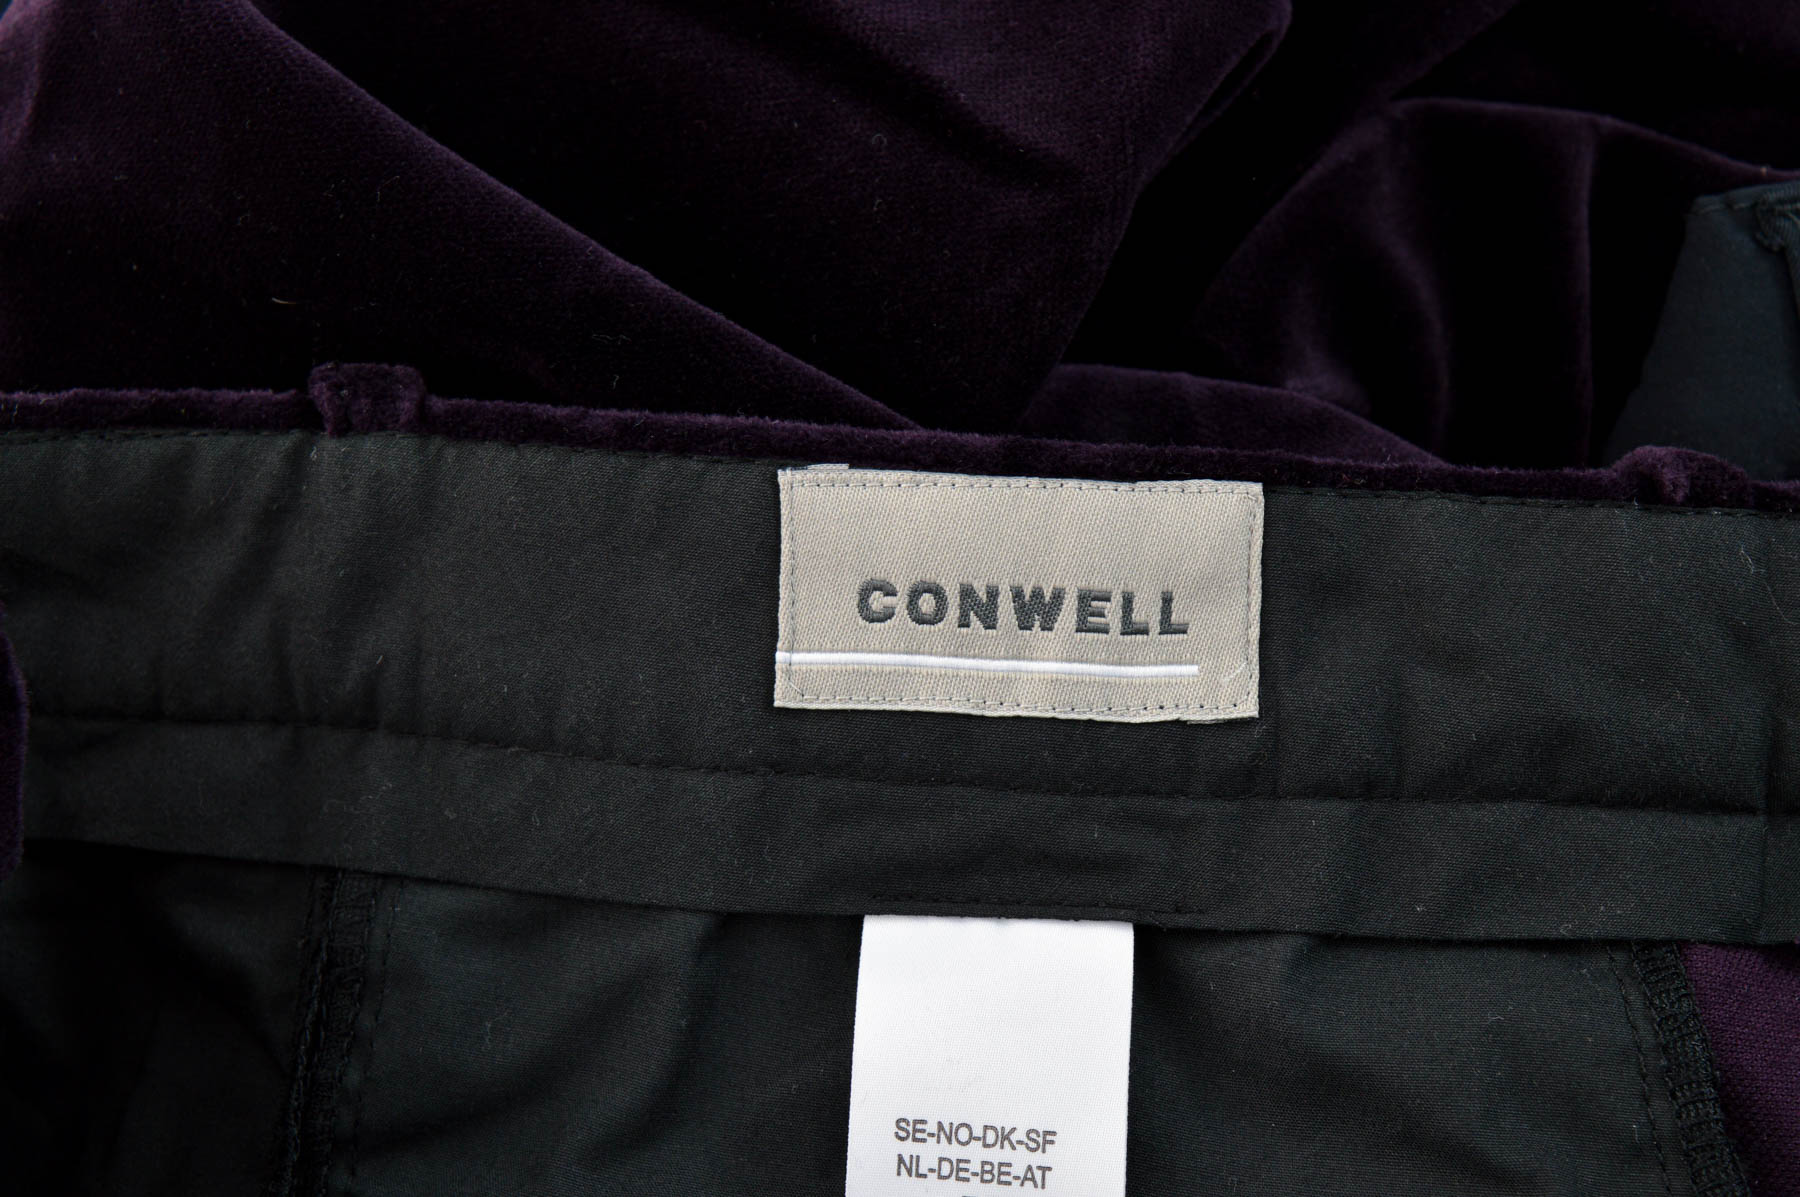 Men's trousers - Conwell - 2